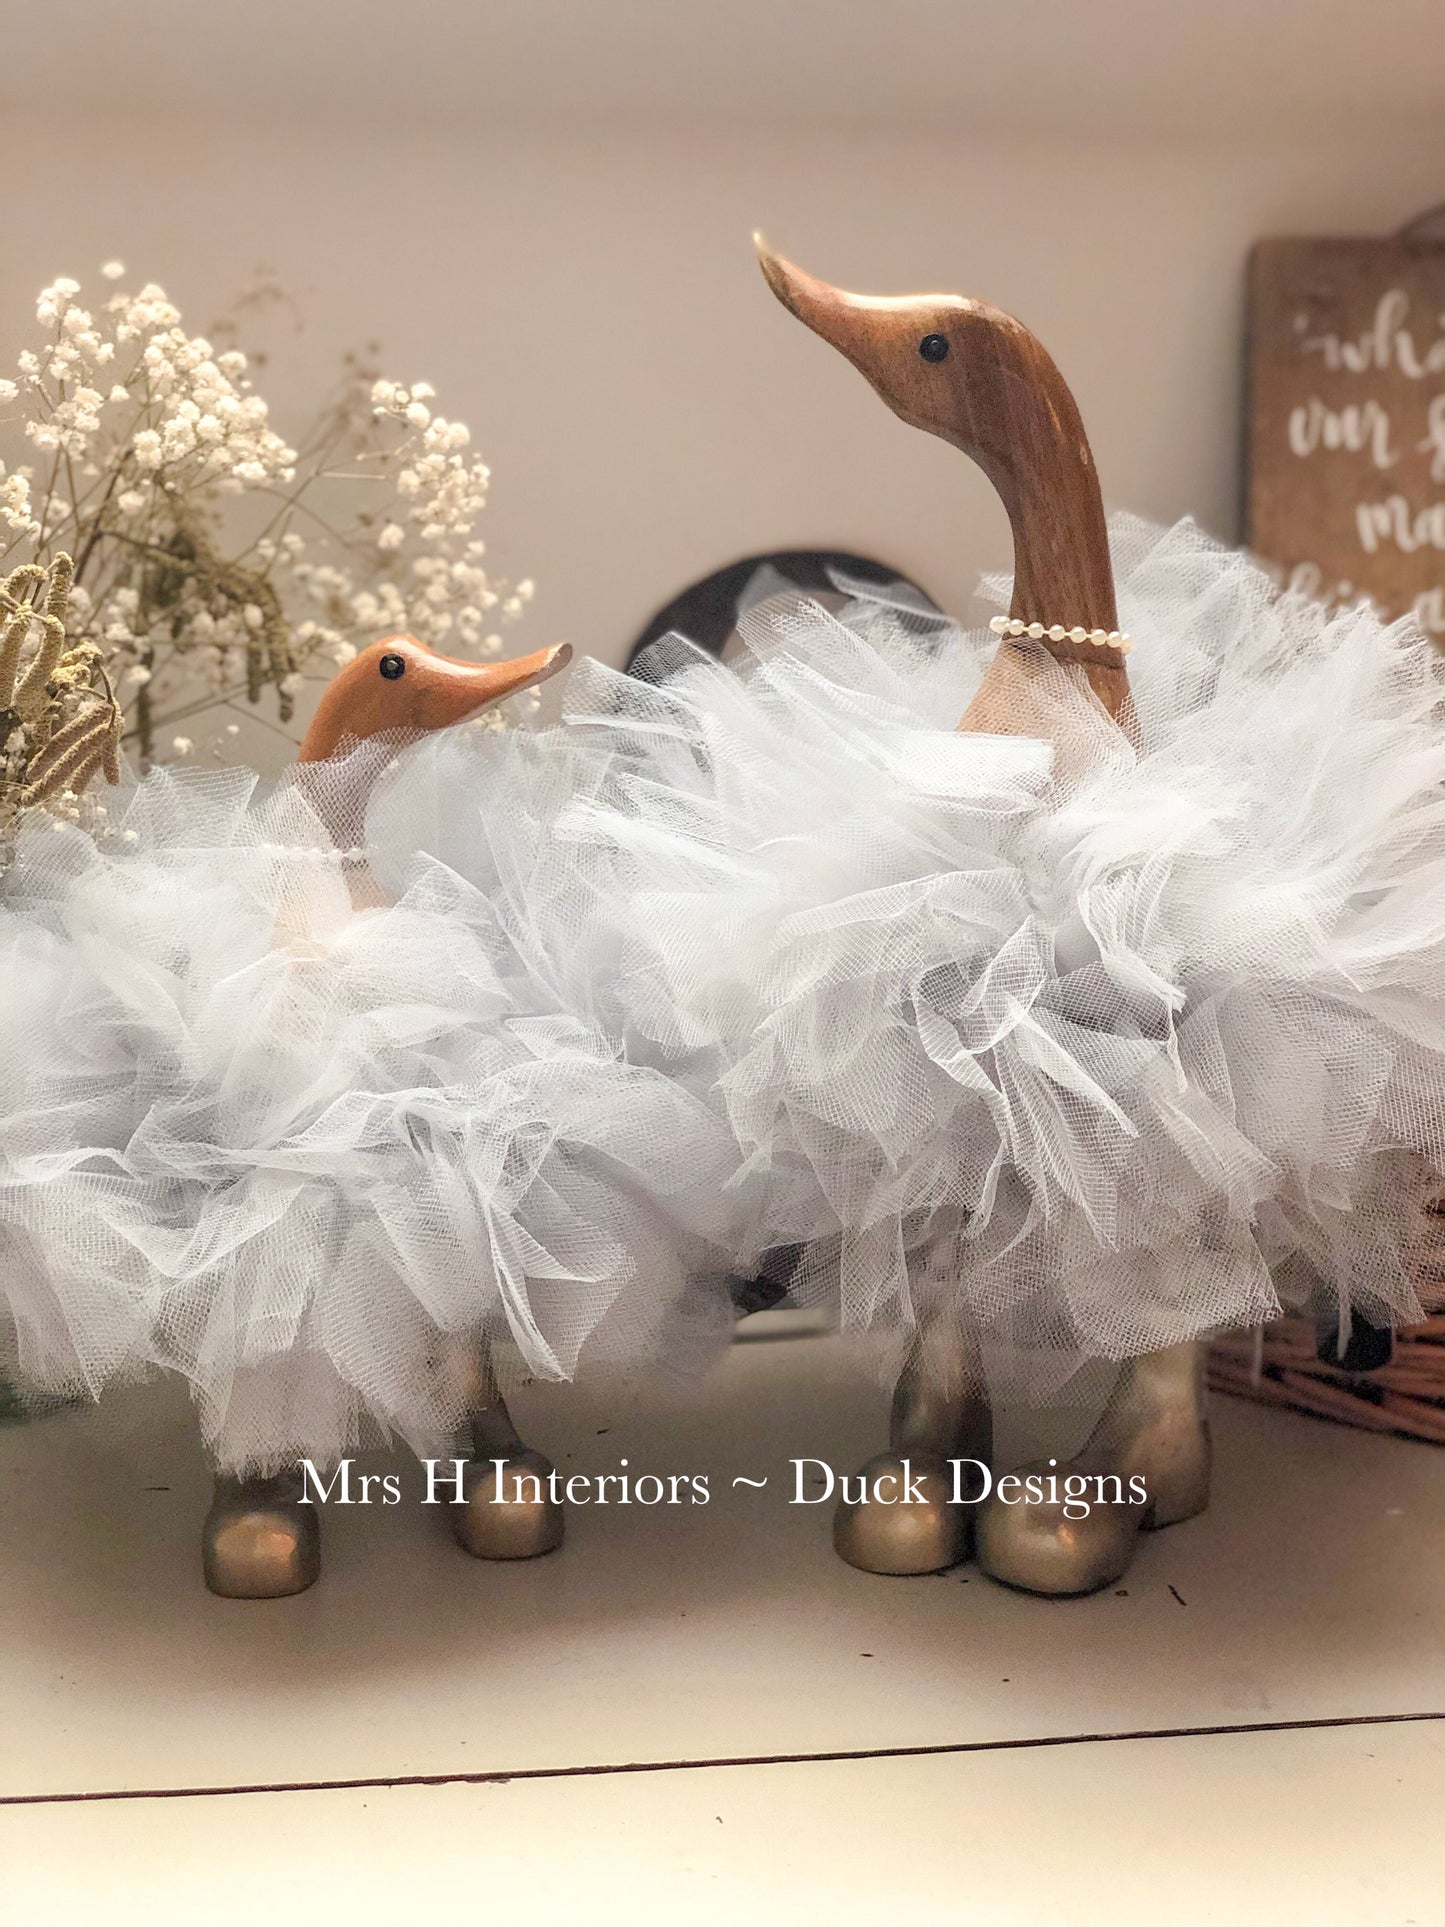 Tutu and pearls - Decorated Wooden Duck in Boots by Mrs H the Duck Lady